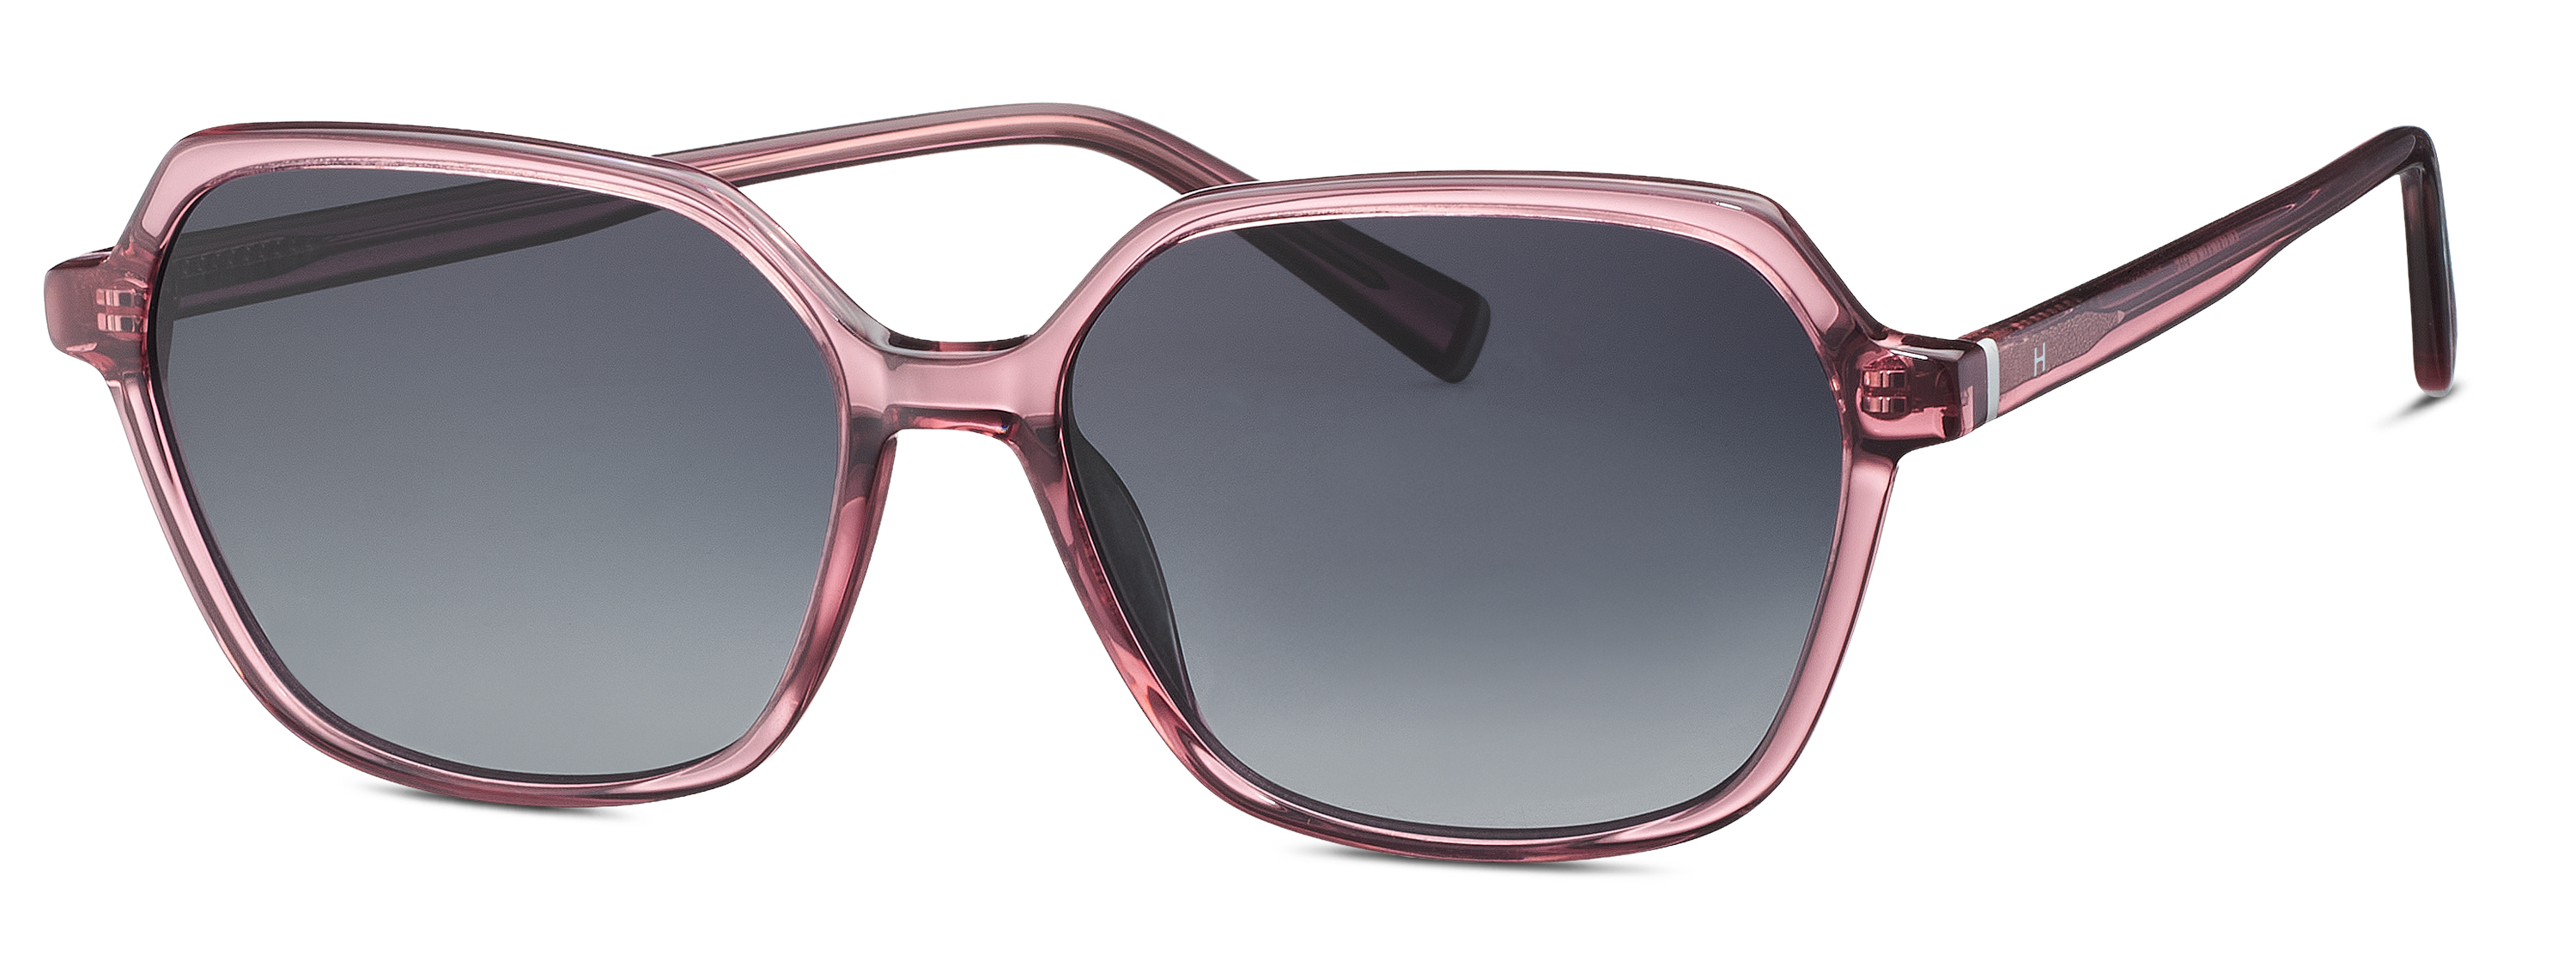 [products.image.front] HUMPHREY´S eyewear 588171 50 Sonnenbrille